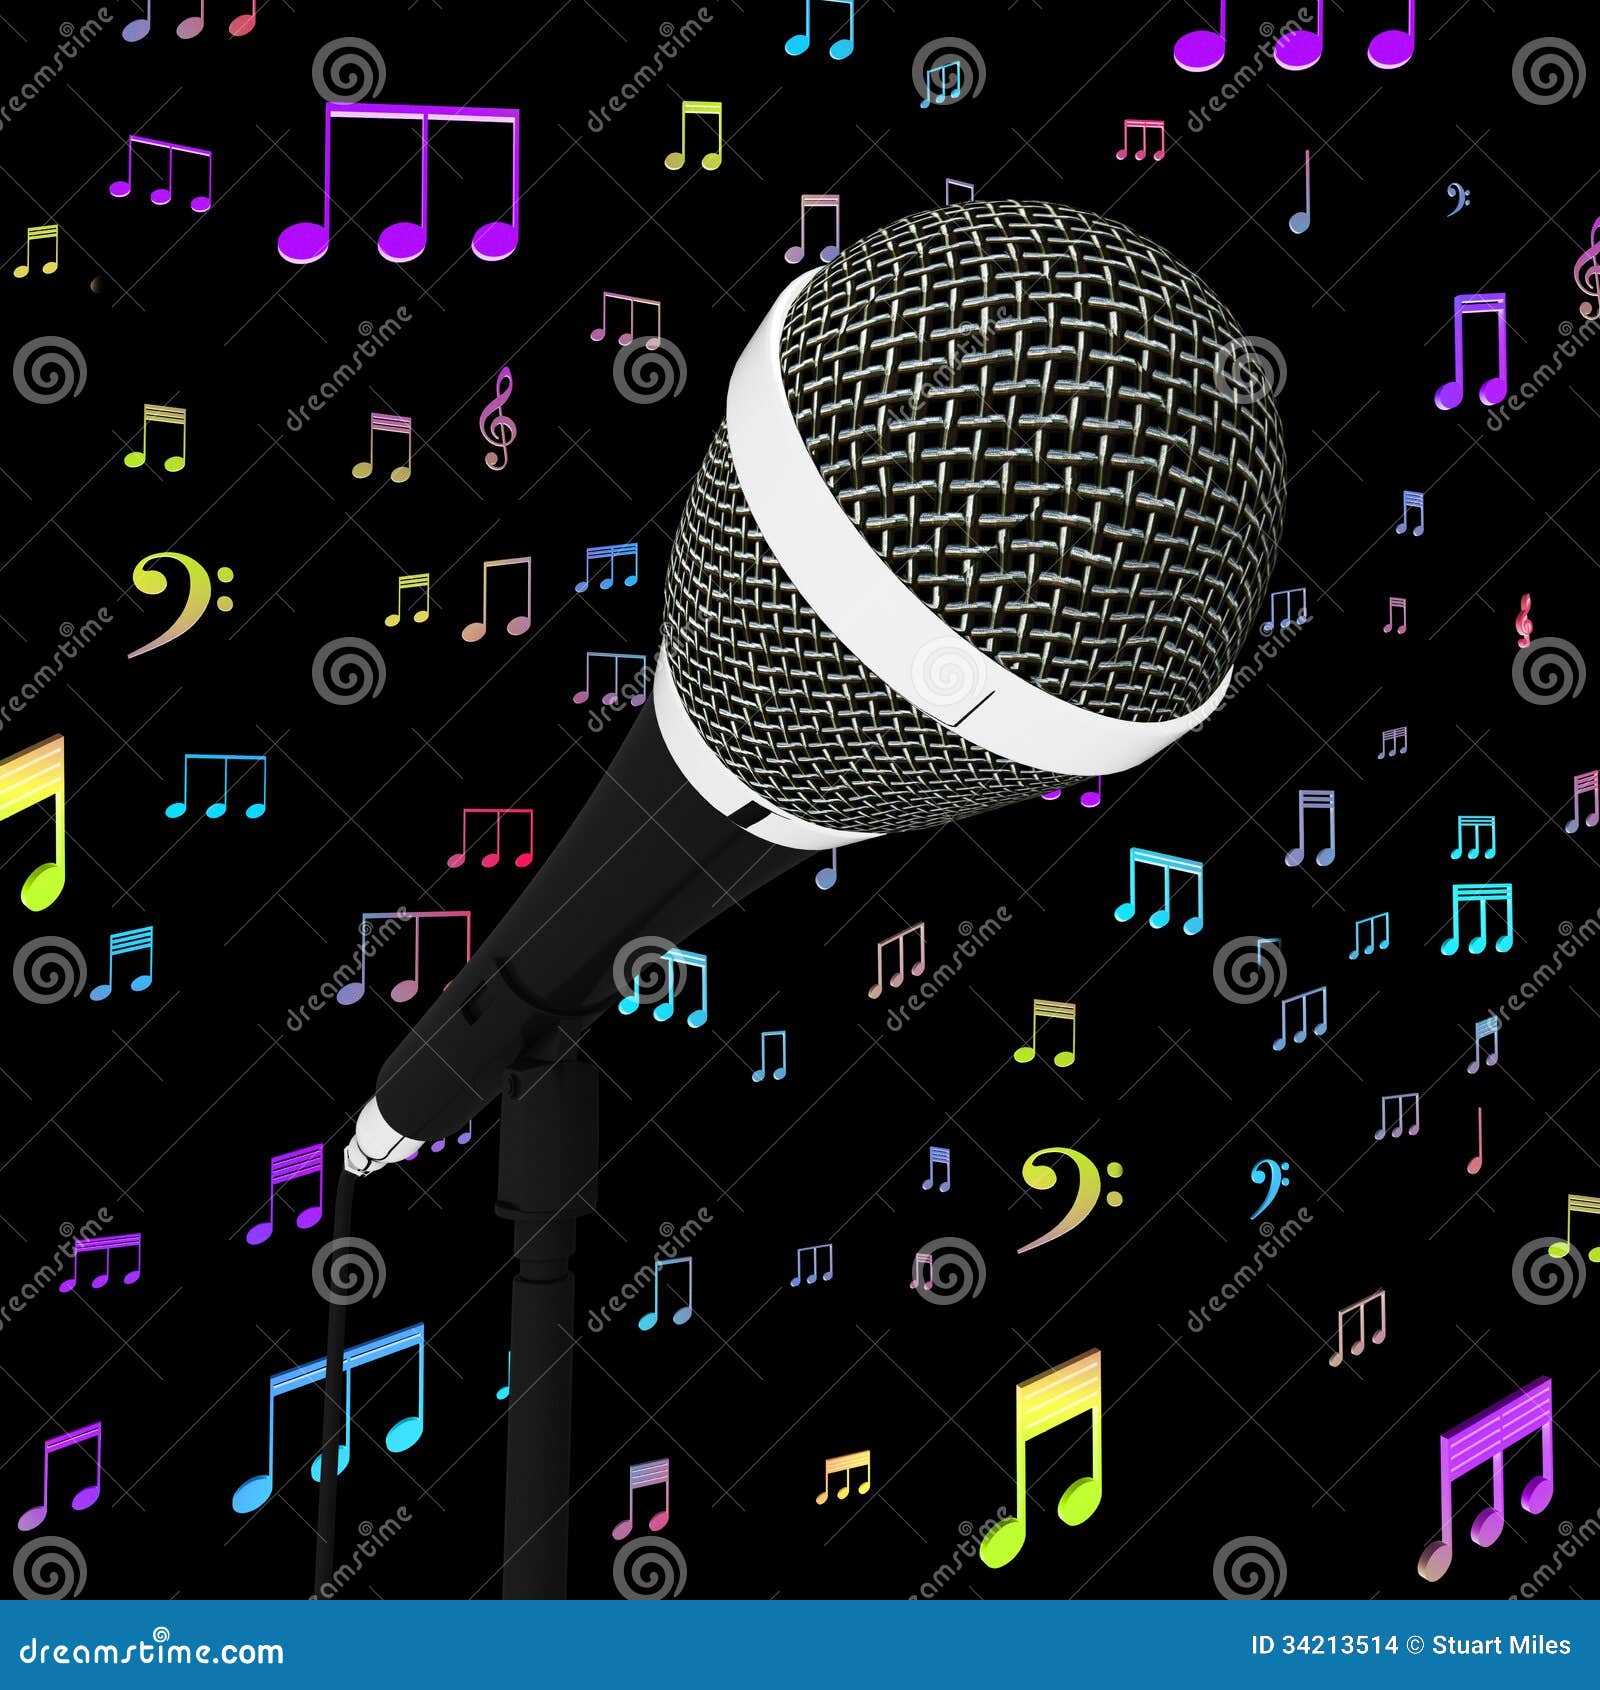 microphone closeup with music notes shows songs or hits